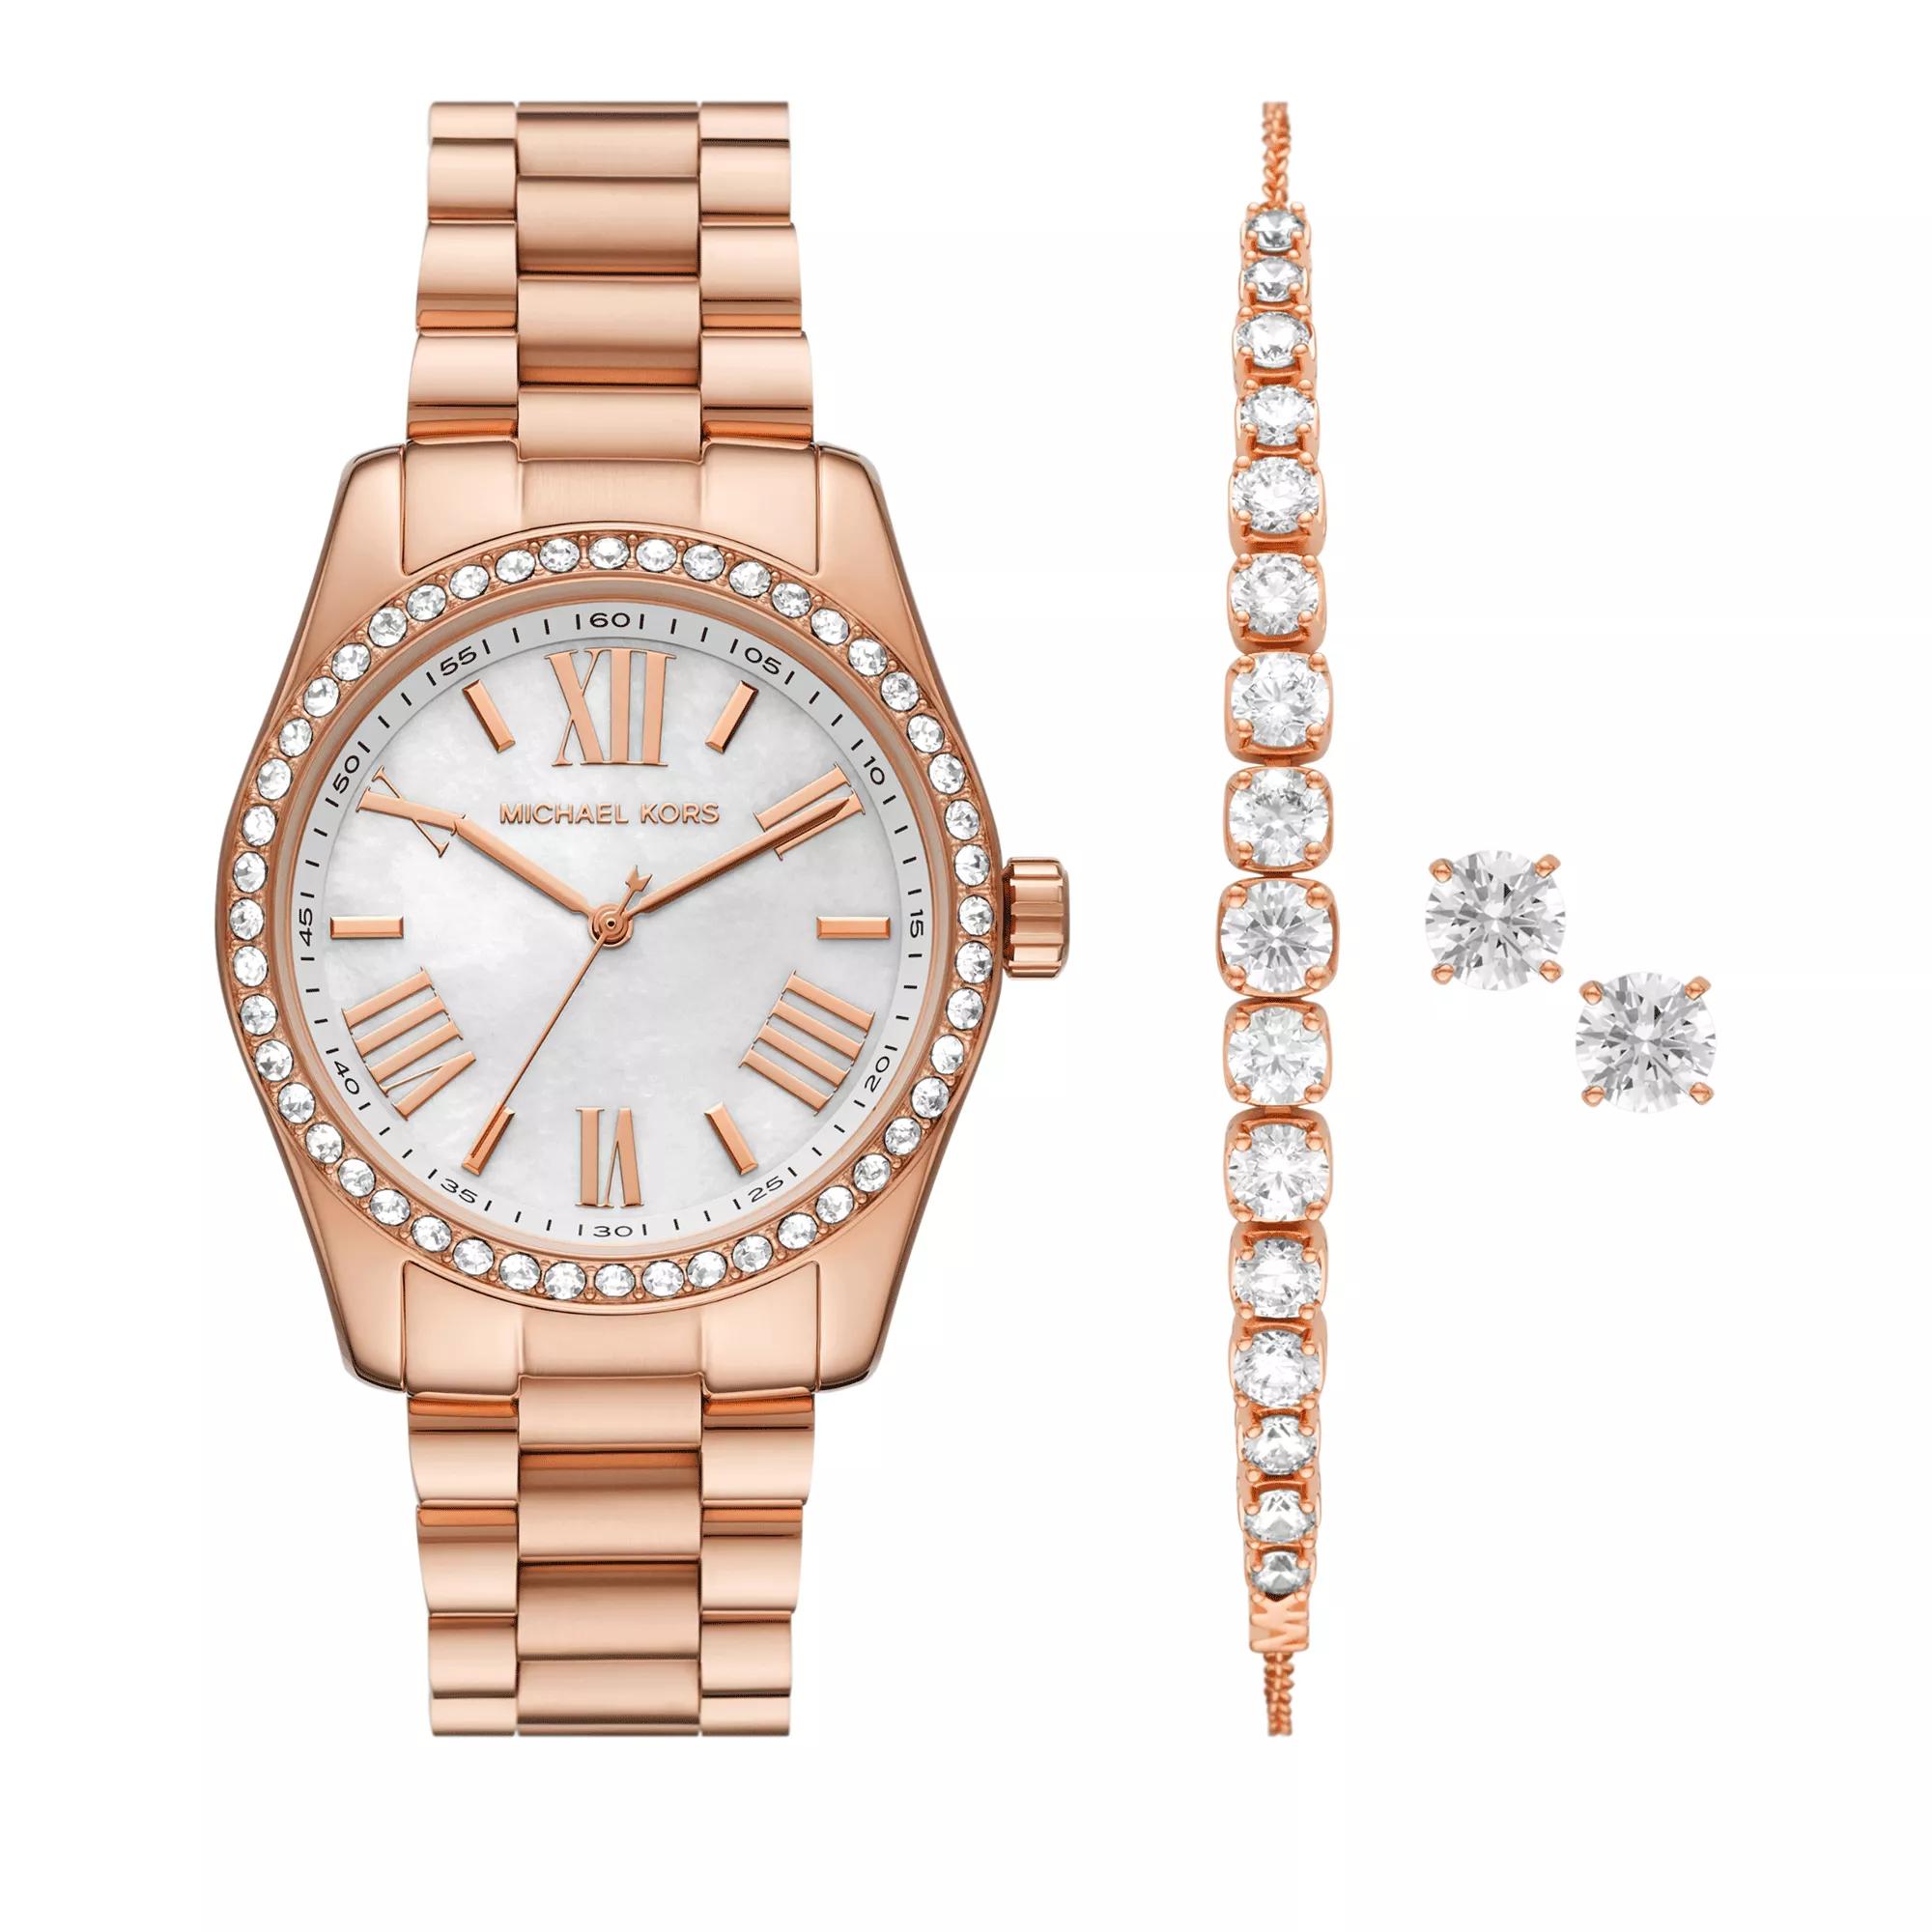 Michael Kors Lexington Three-Hand Gold Watch Quarz-Uhr Stainless Rose and Steel | Jewellery